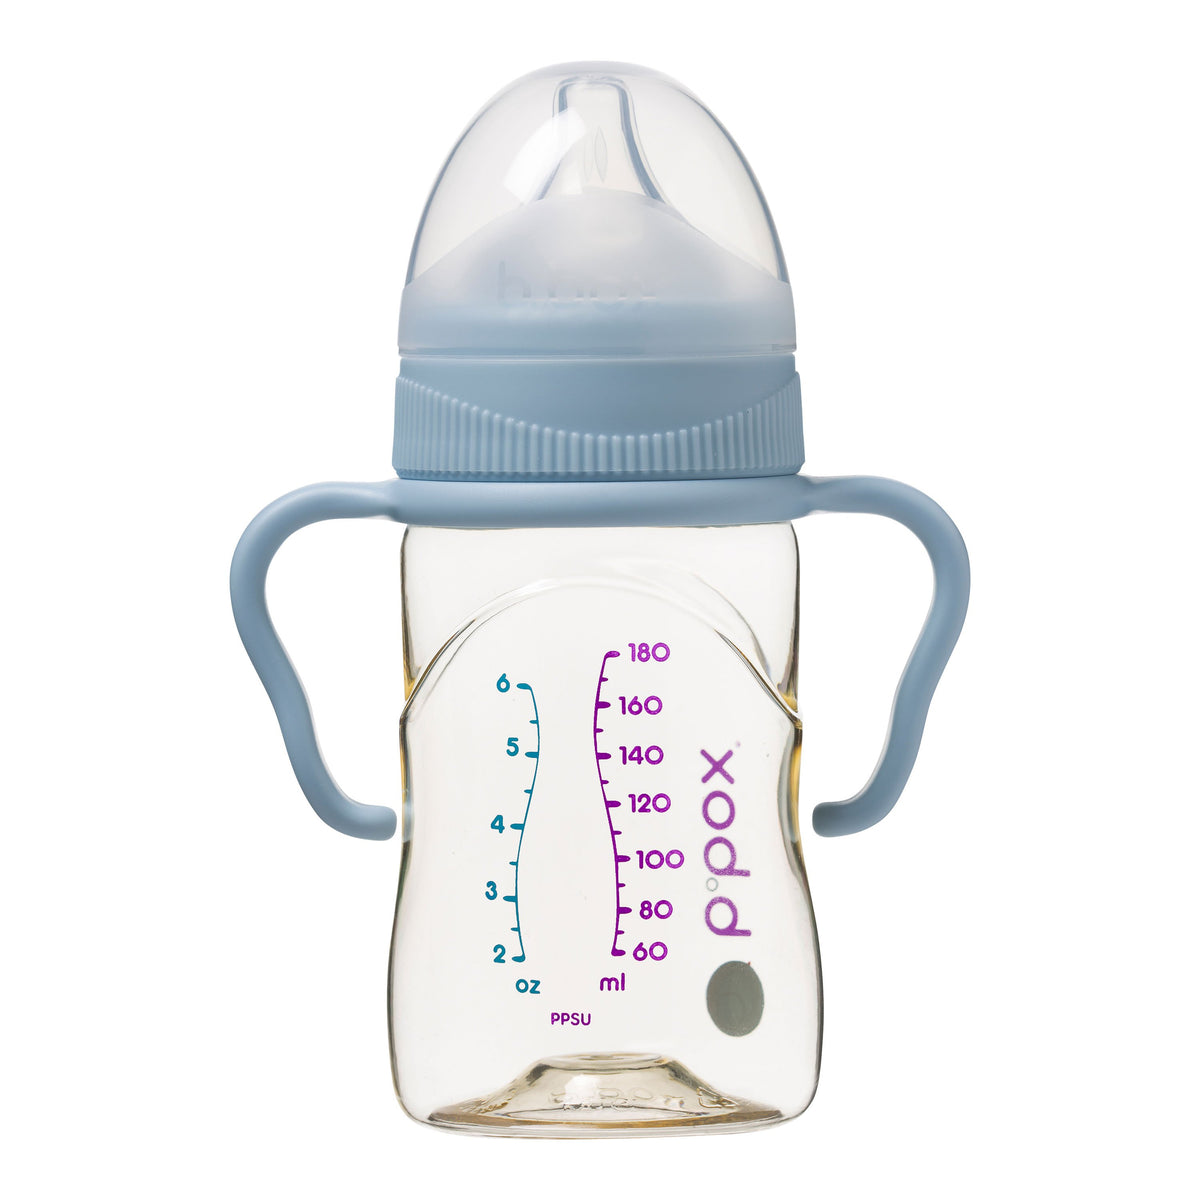 bbox-baby-bottle-anti-colic-teat-set-of-2-stage-3-6-month+- (5)